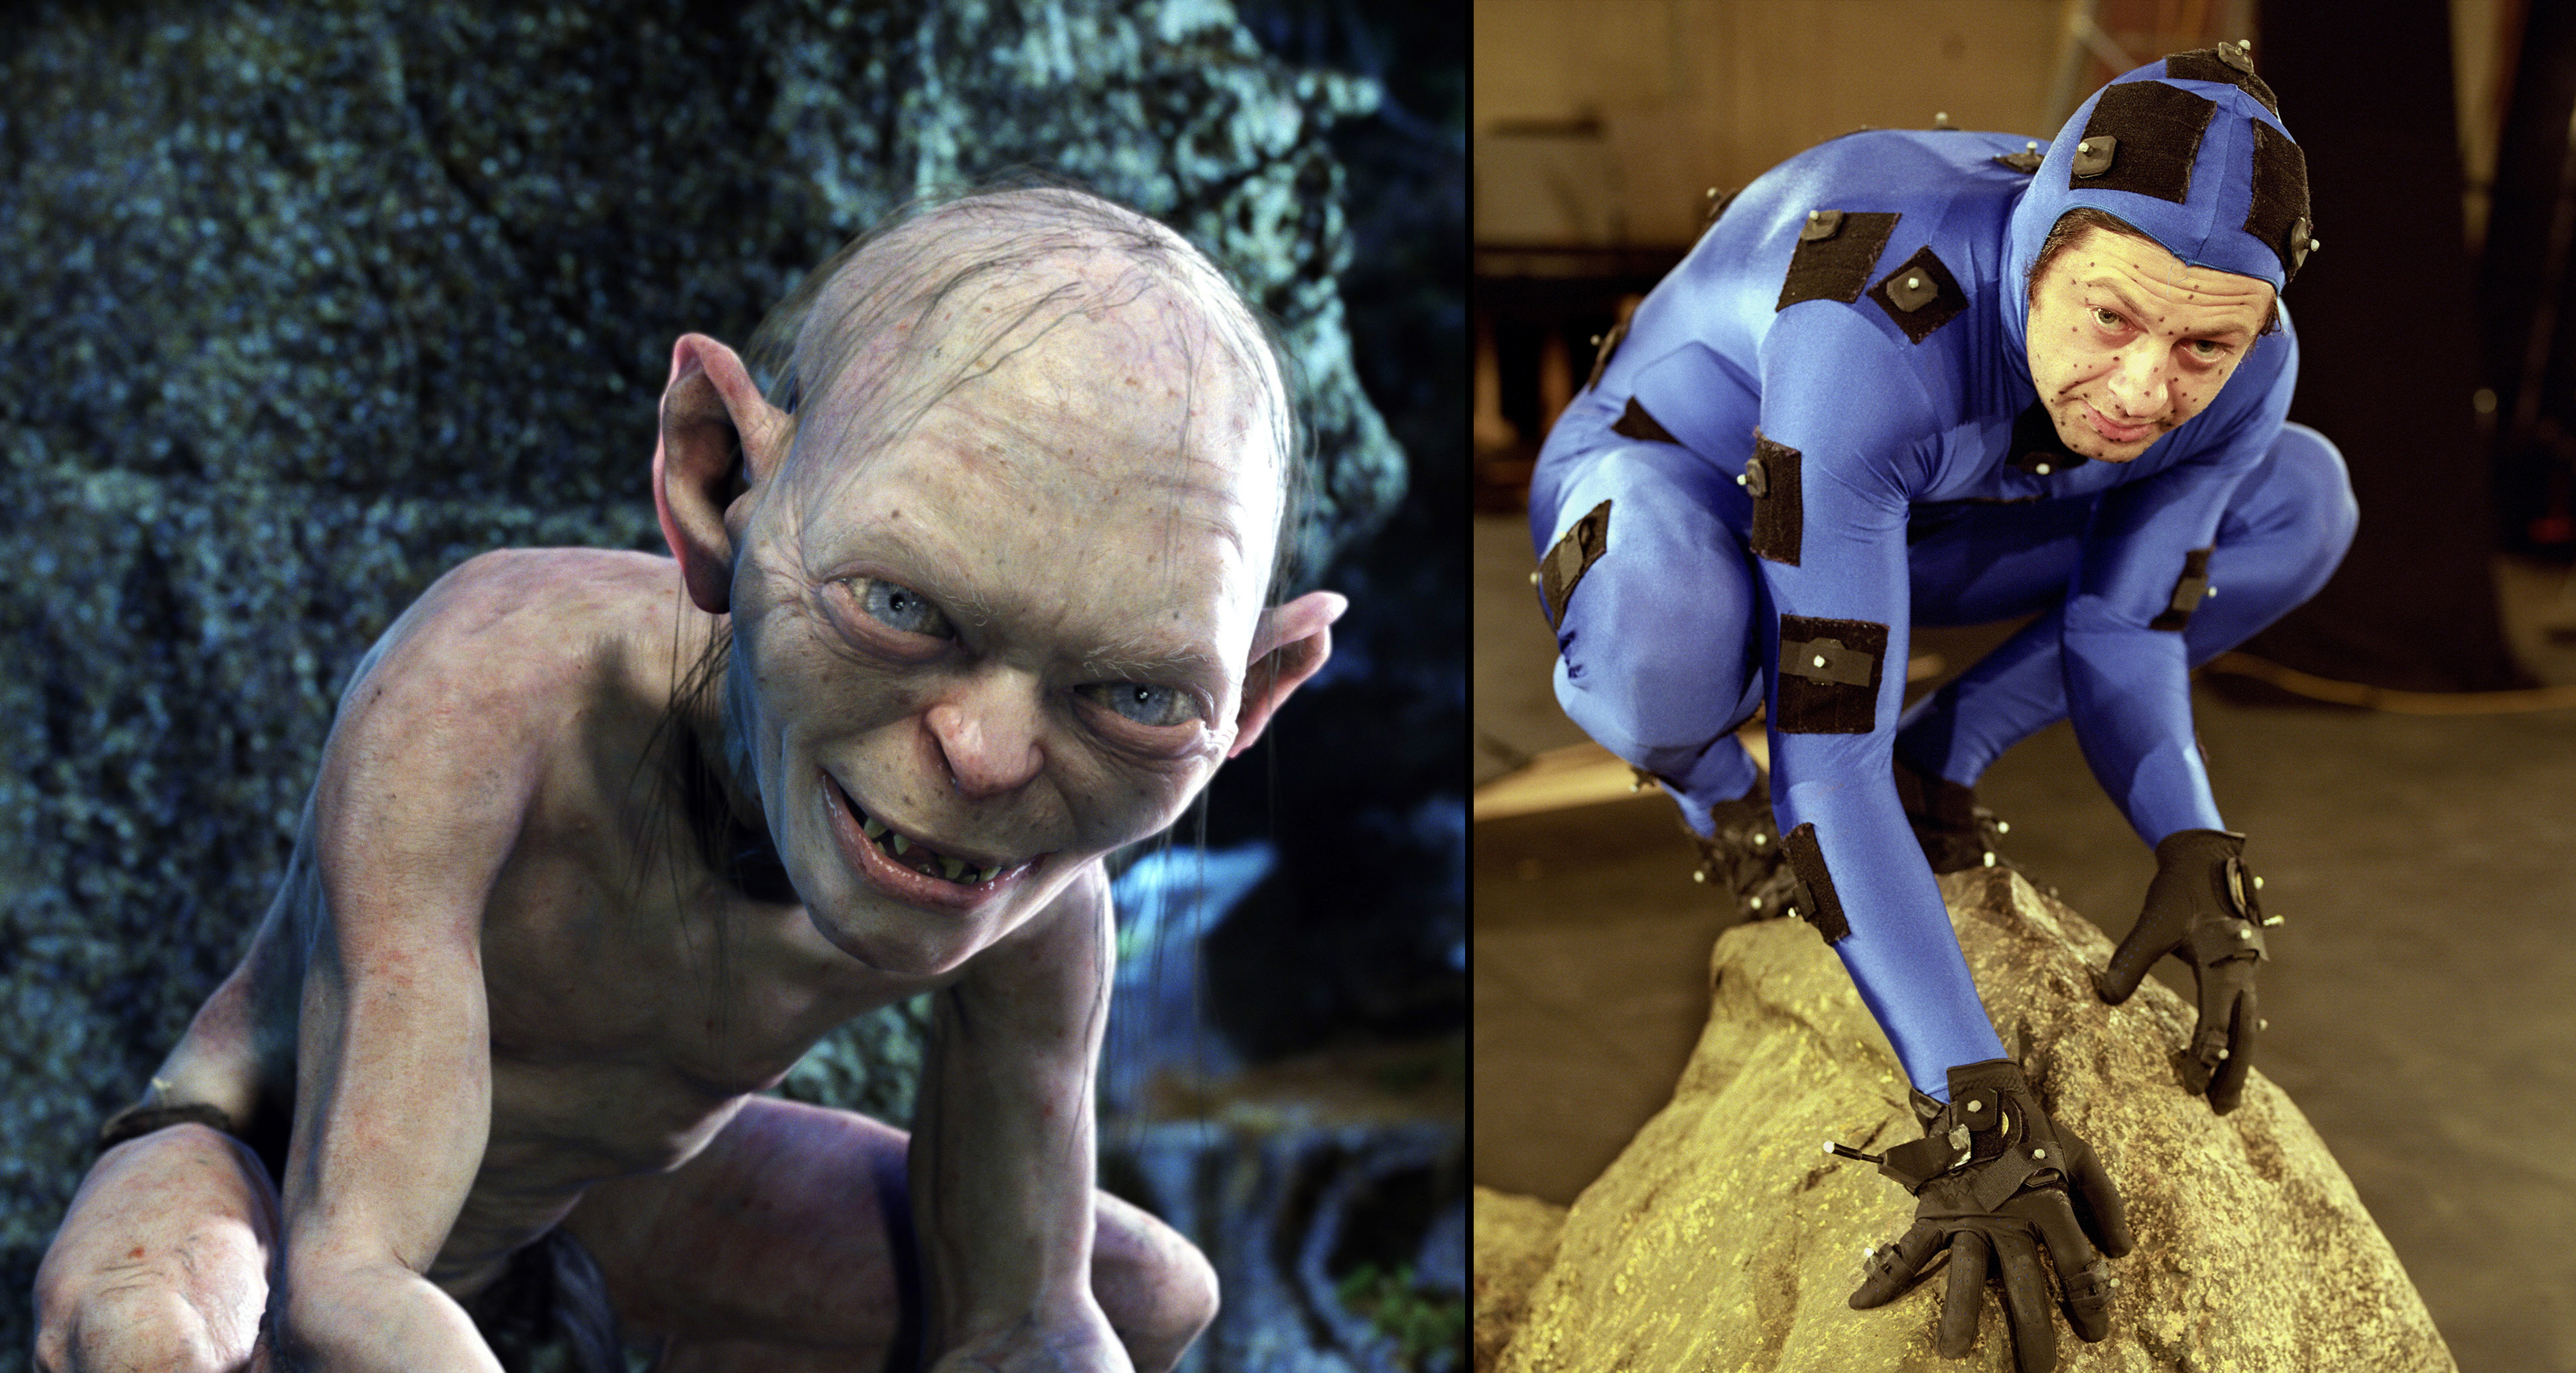 Lord Of The Rings Two Towers: the character Gollum who's role is crucial to the journey of Frodo and Sam--Gollum's movements are performed via computer program by actor Andy Serkis. Photo: New Line Cinema